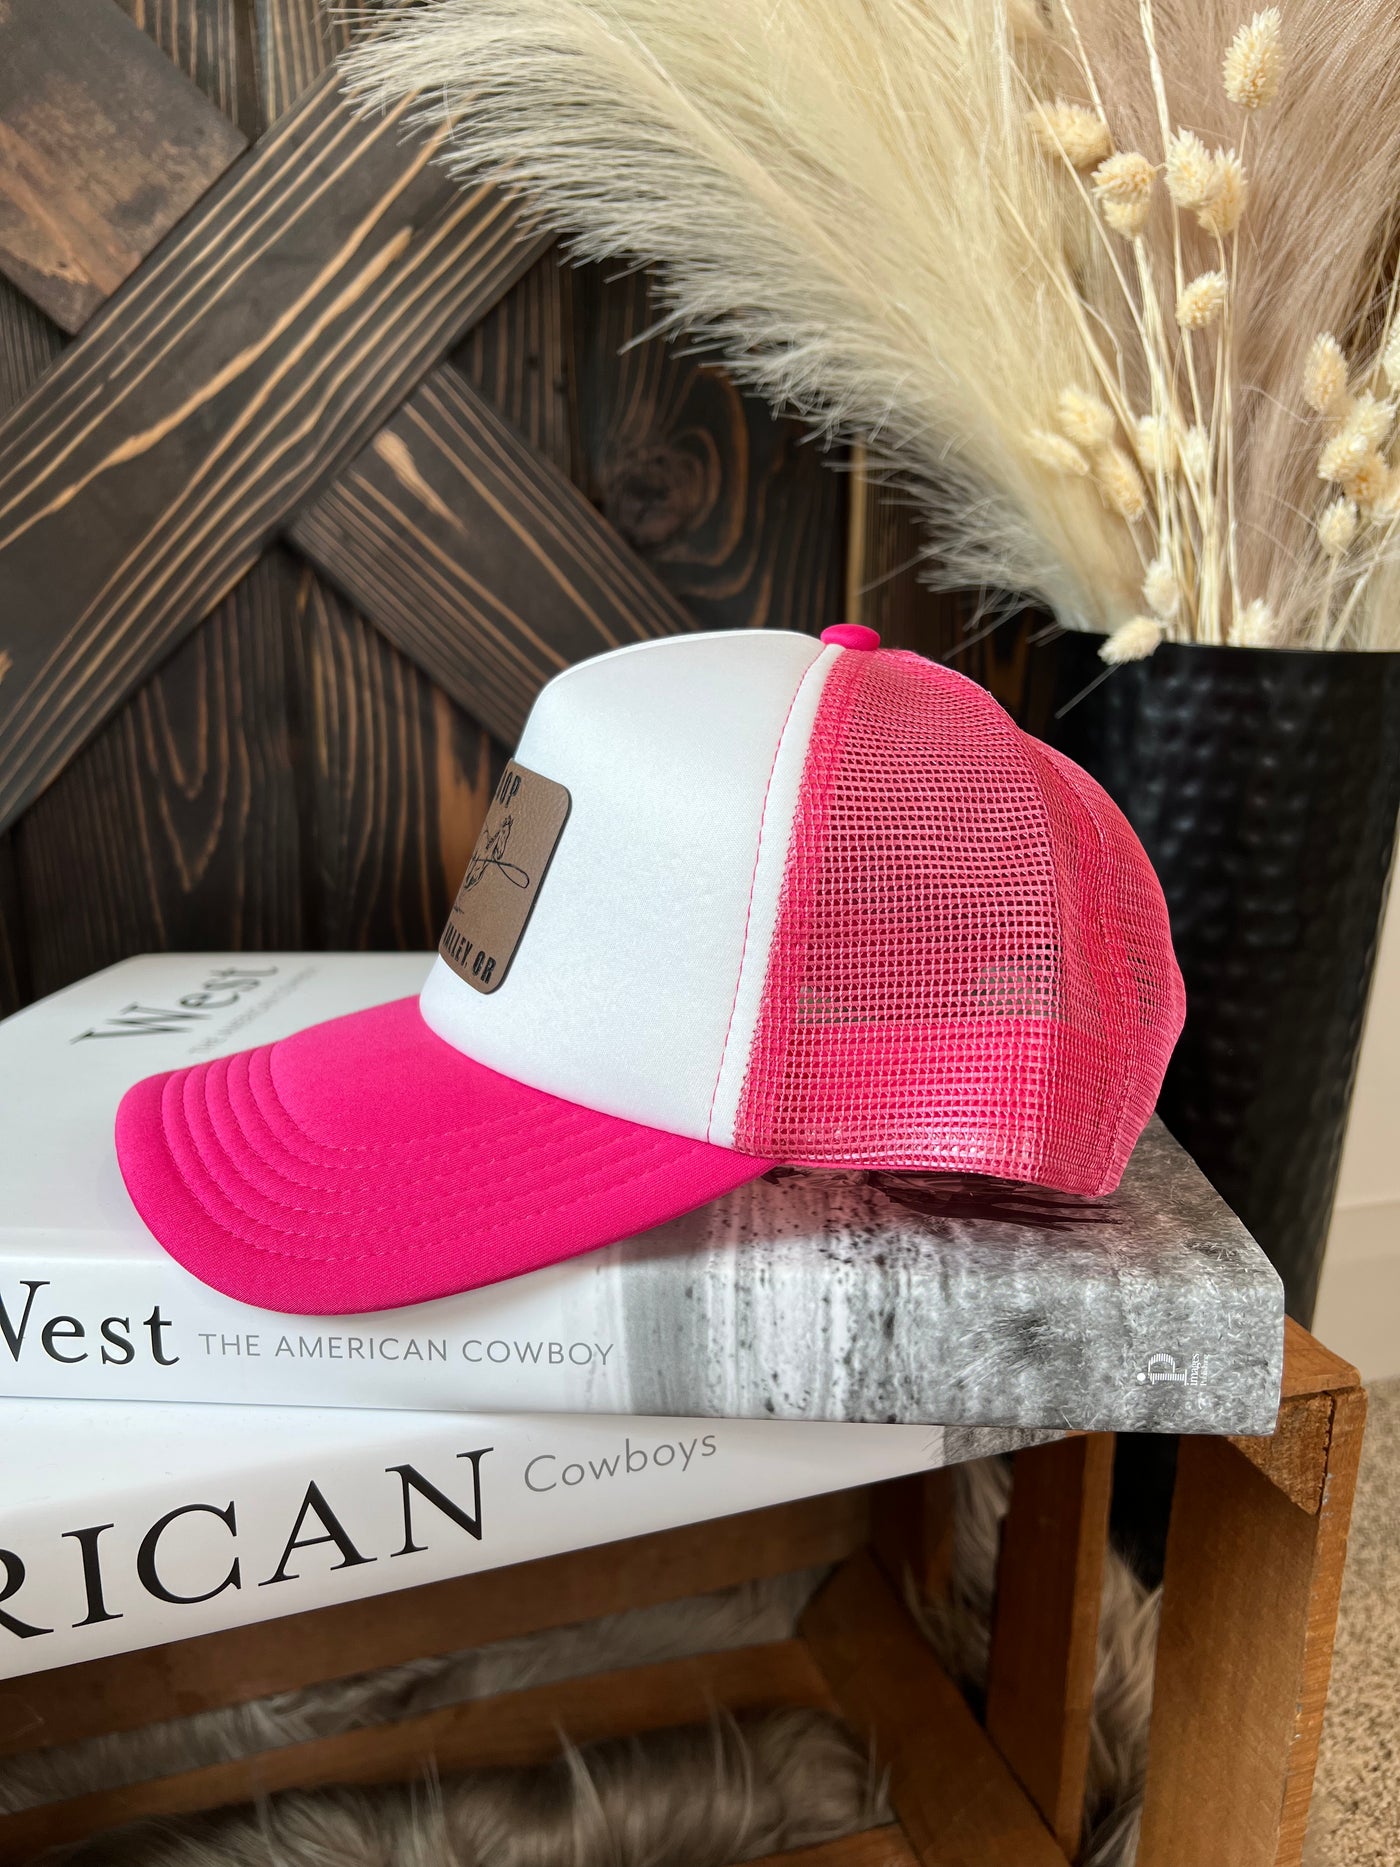 Big Loop Leather Patch Hat - Hot Pink